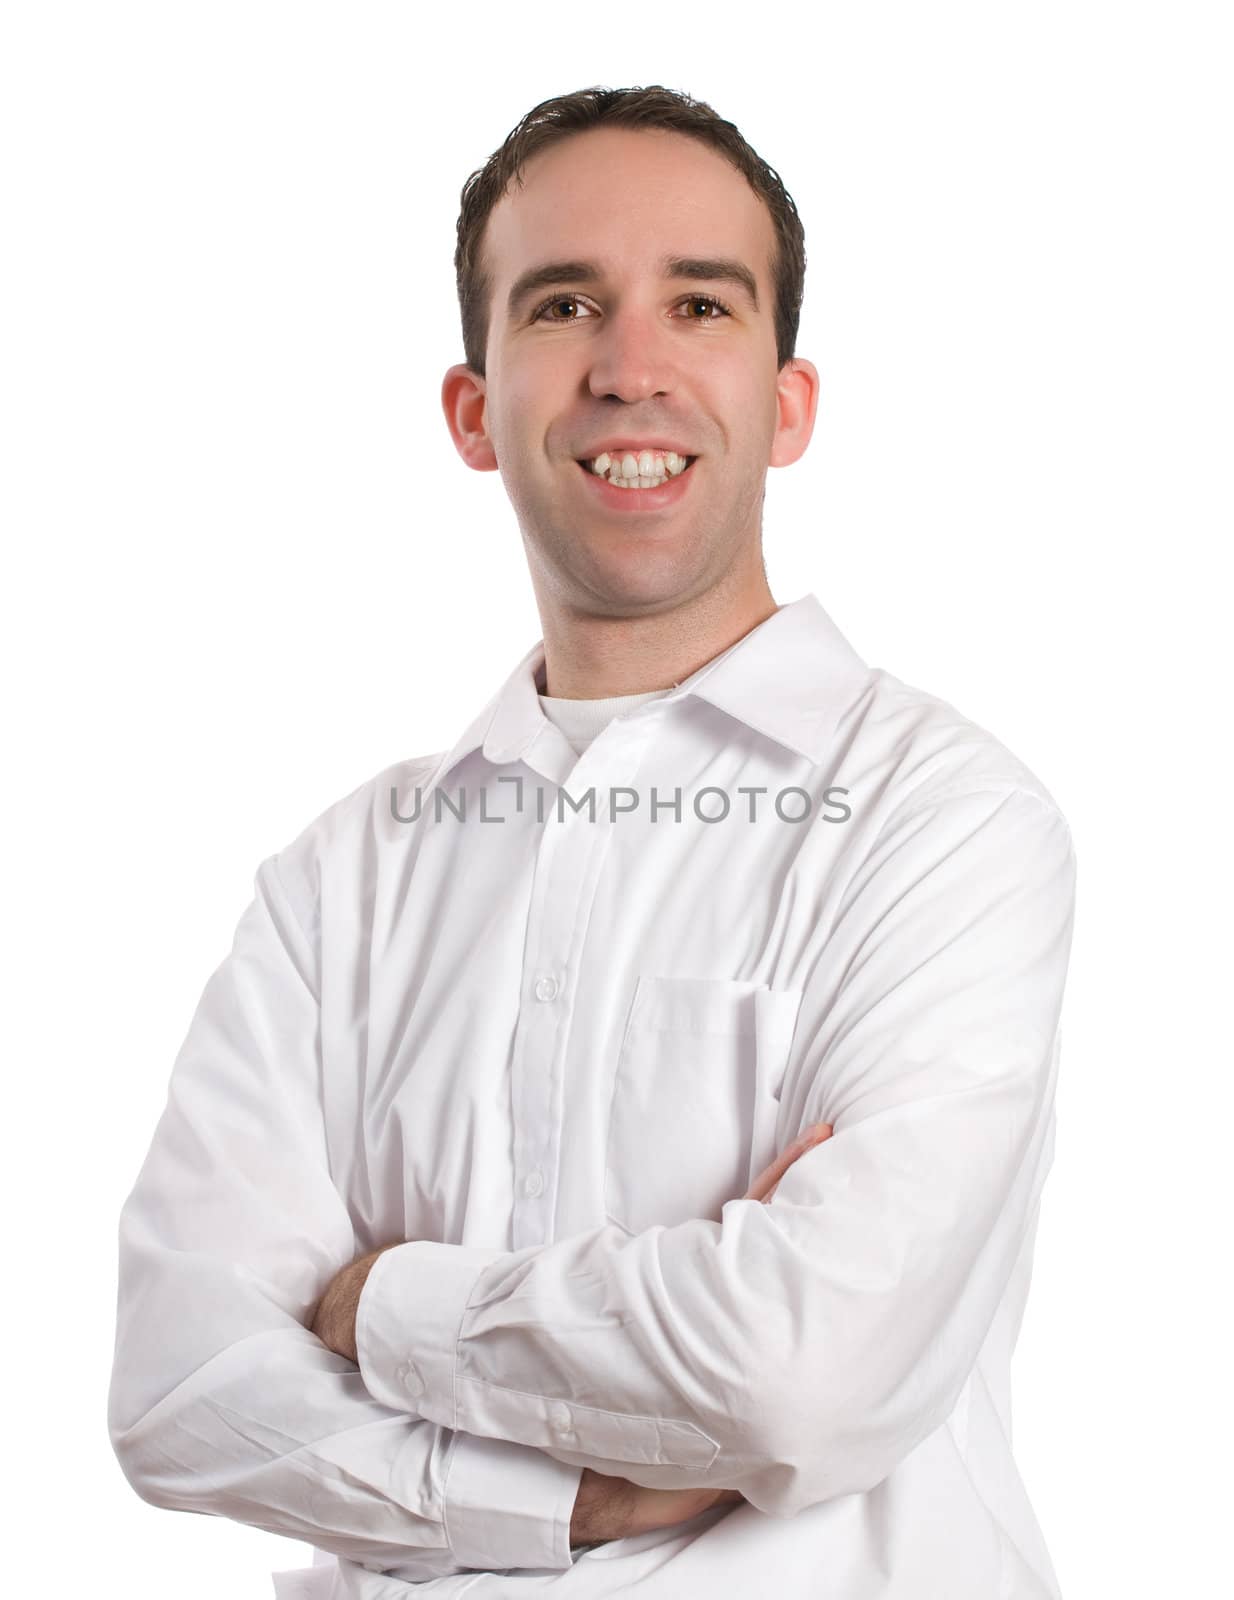 A young man wearing a white dress shirt is standing with his arms crossed and smiling at the camera